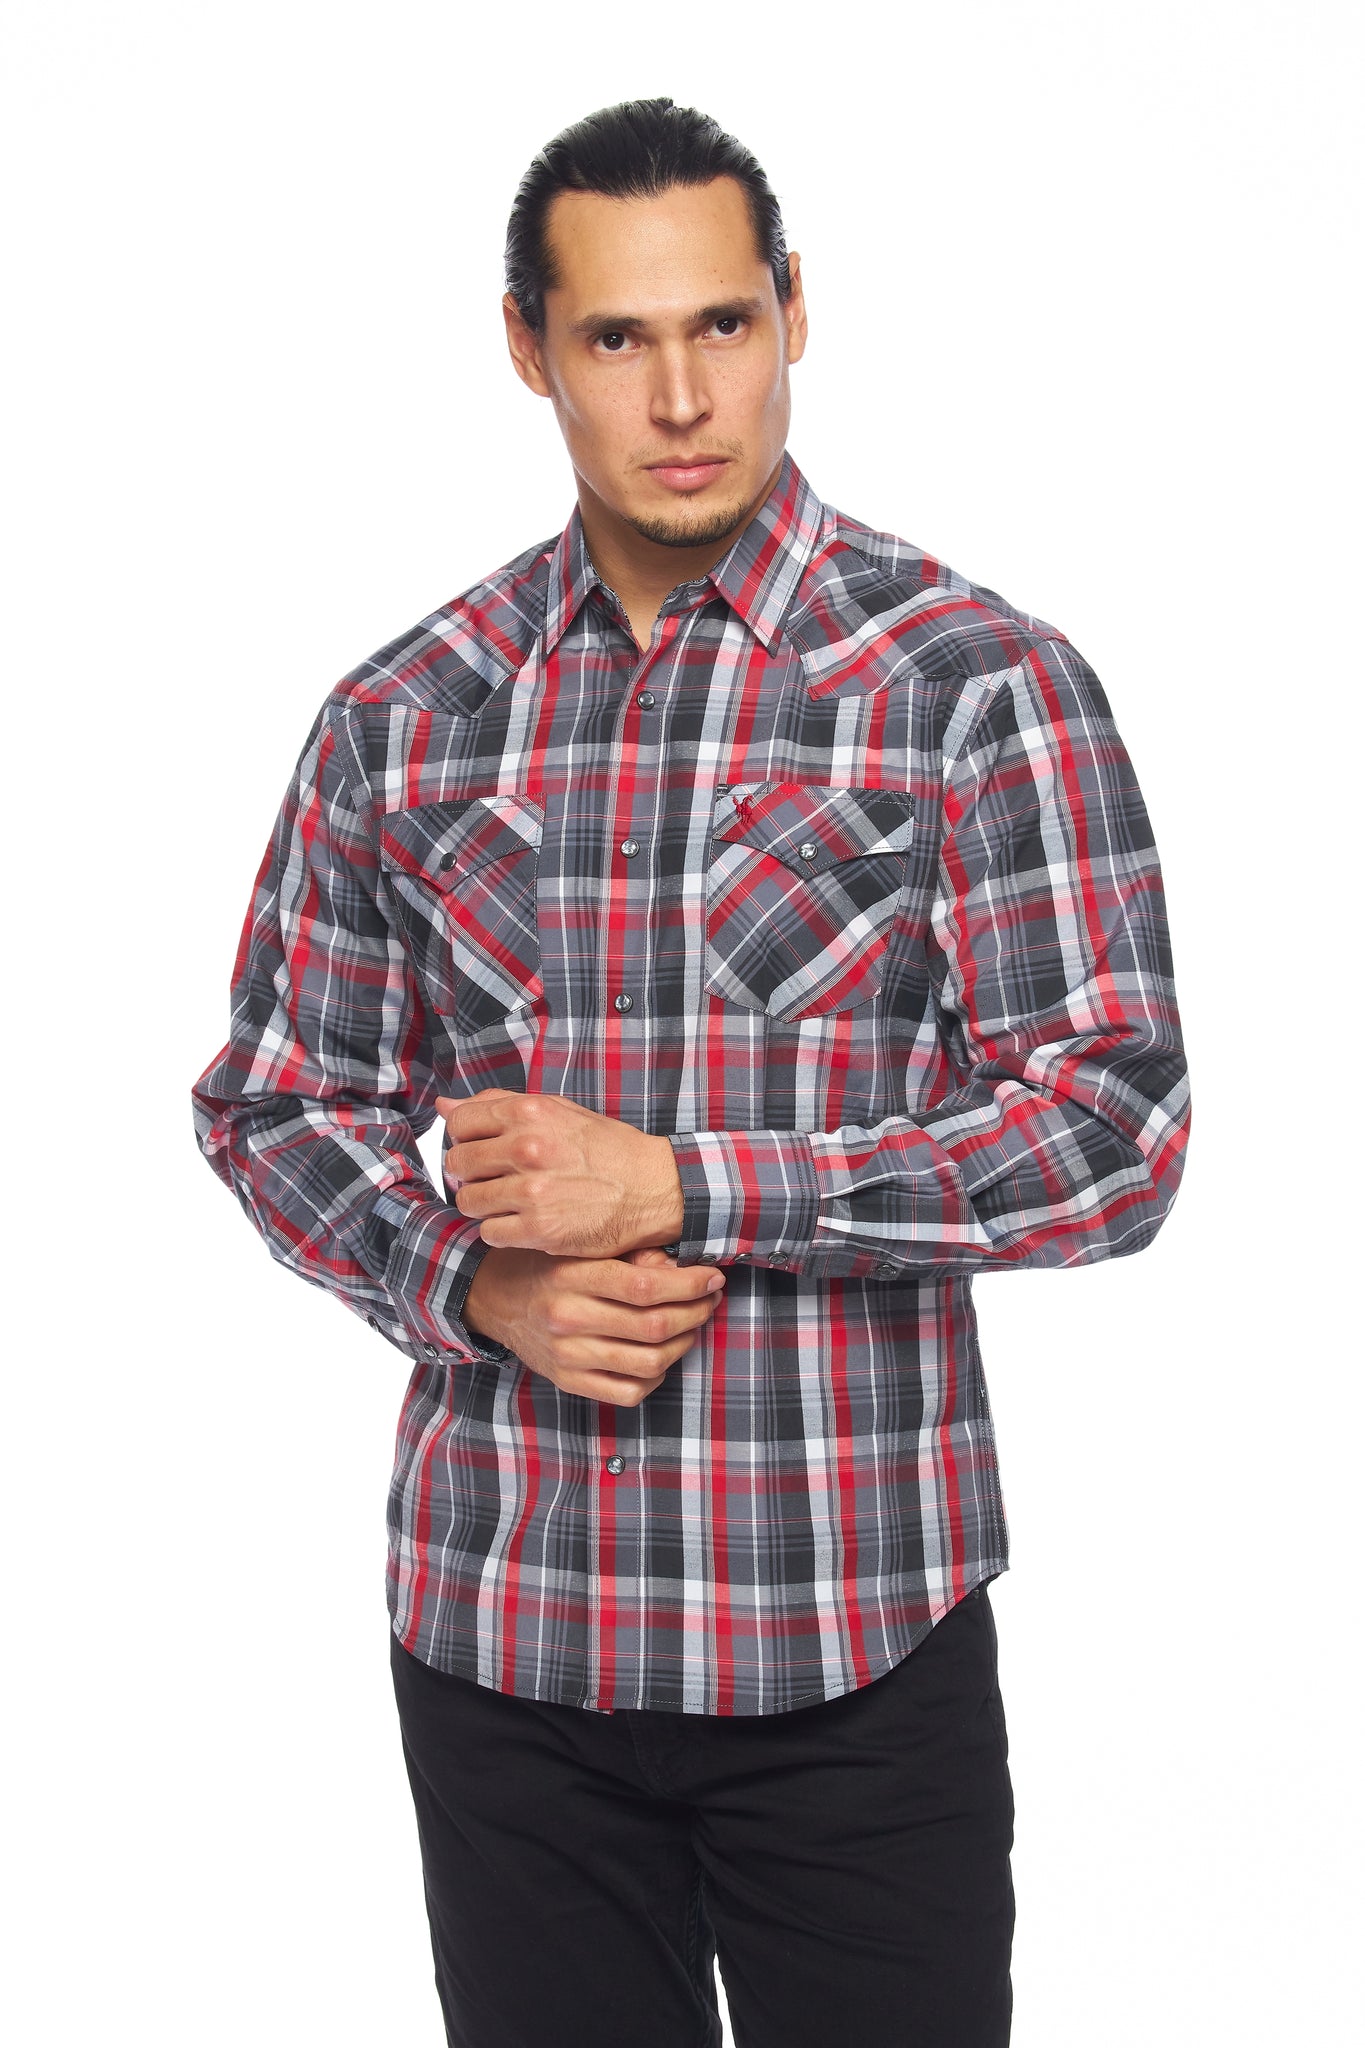 Men's Western Long Sleeve Plaid Shirts With Snap Buttons